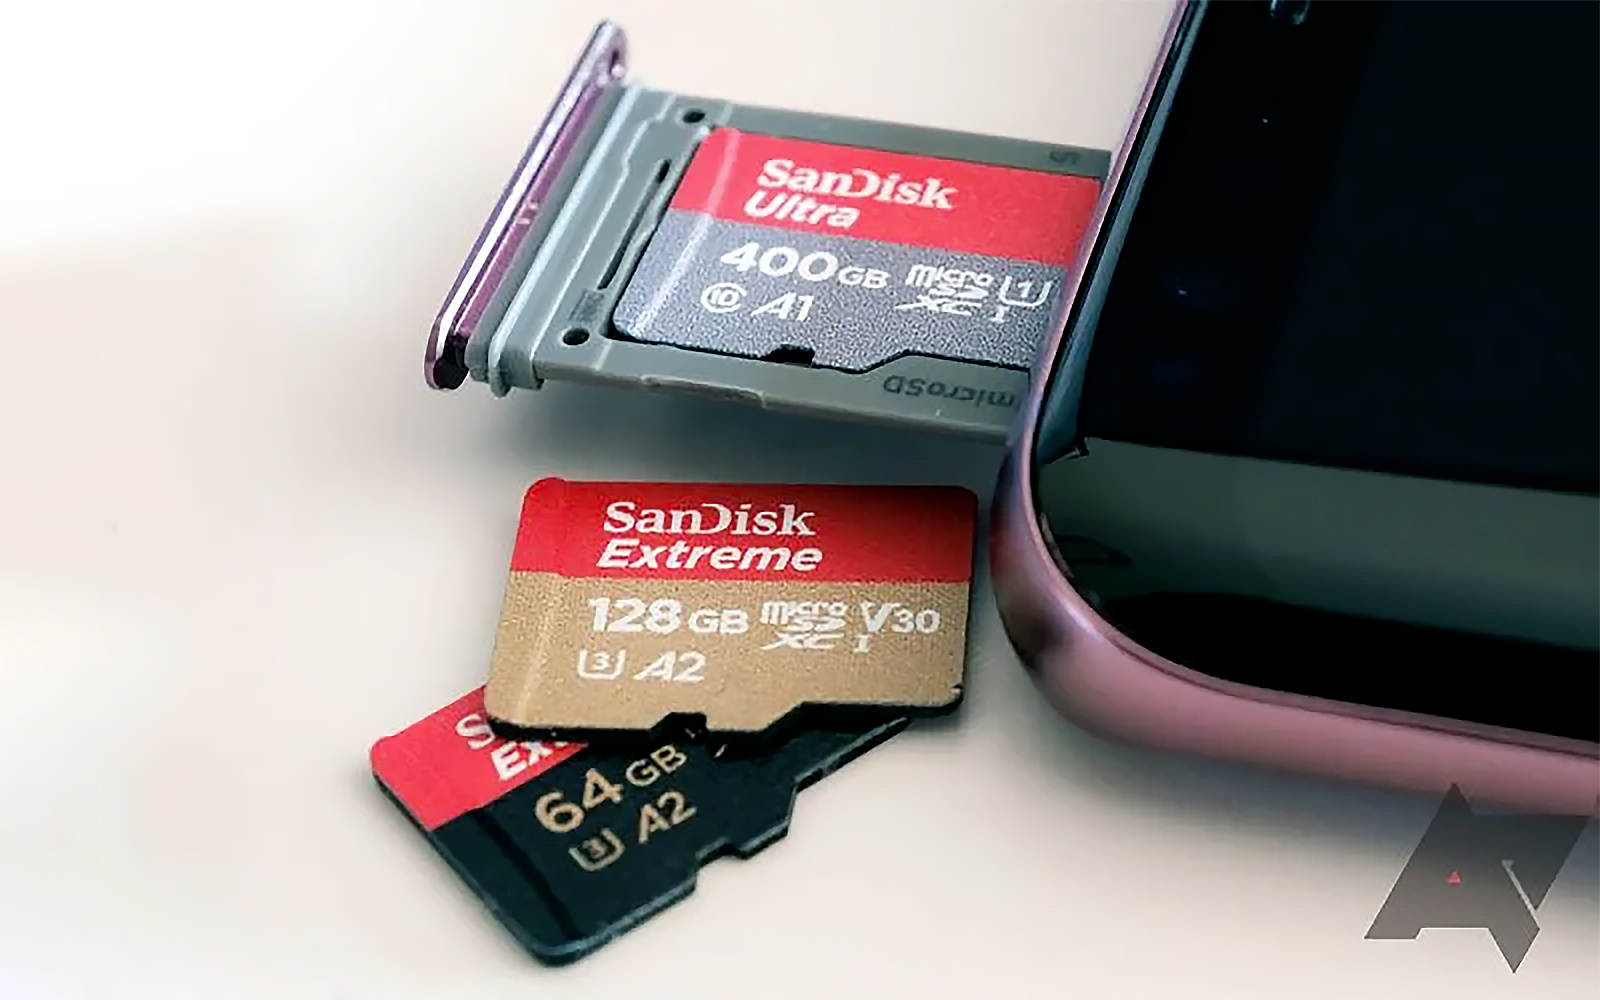 three sd cards resting next to an Android device